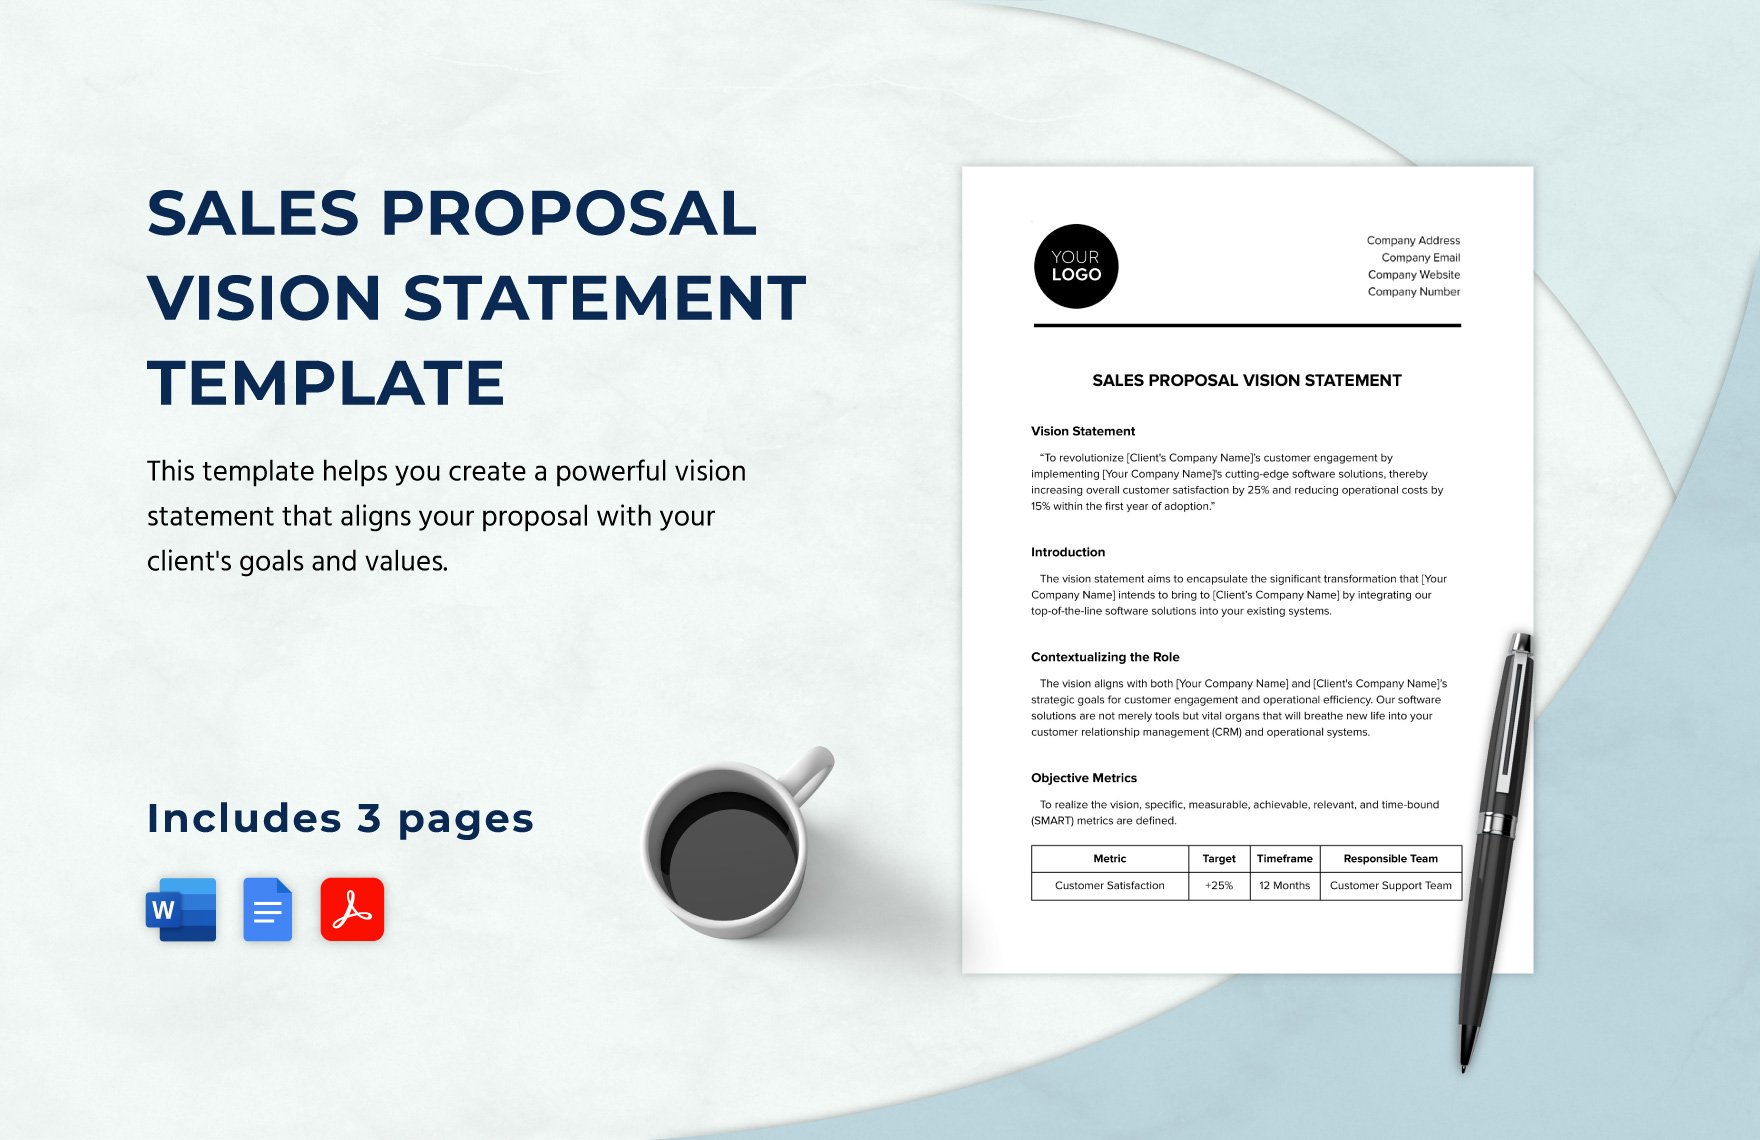 Sales Proposal Vision Statement Template